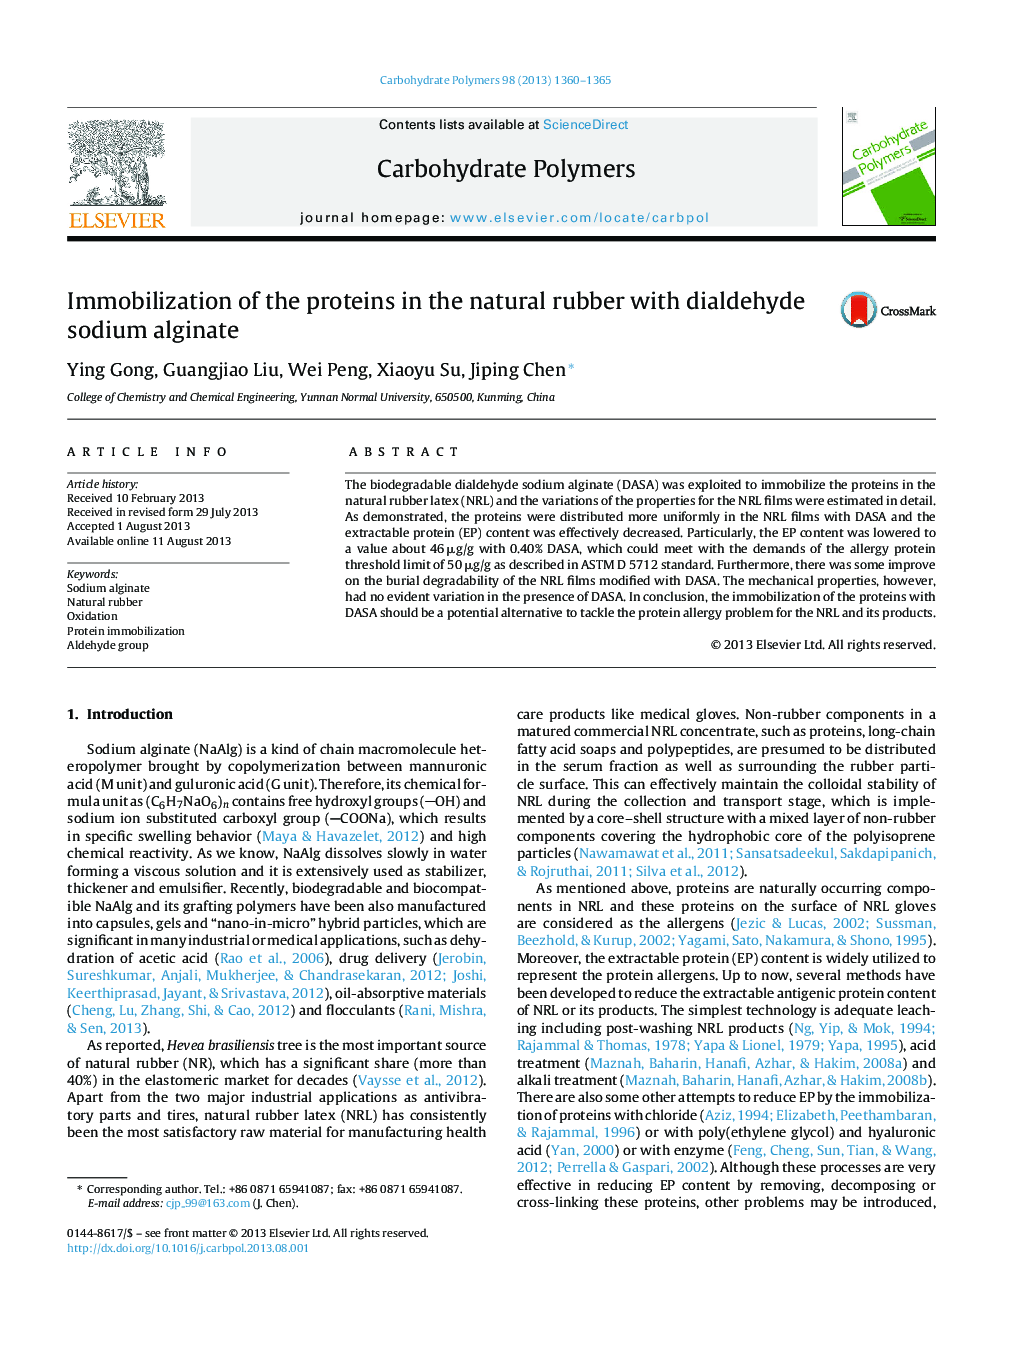 Immobilization of the proteins in the natural rubber with dialdehyde sodium alginate